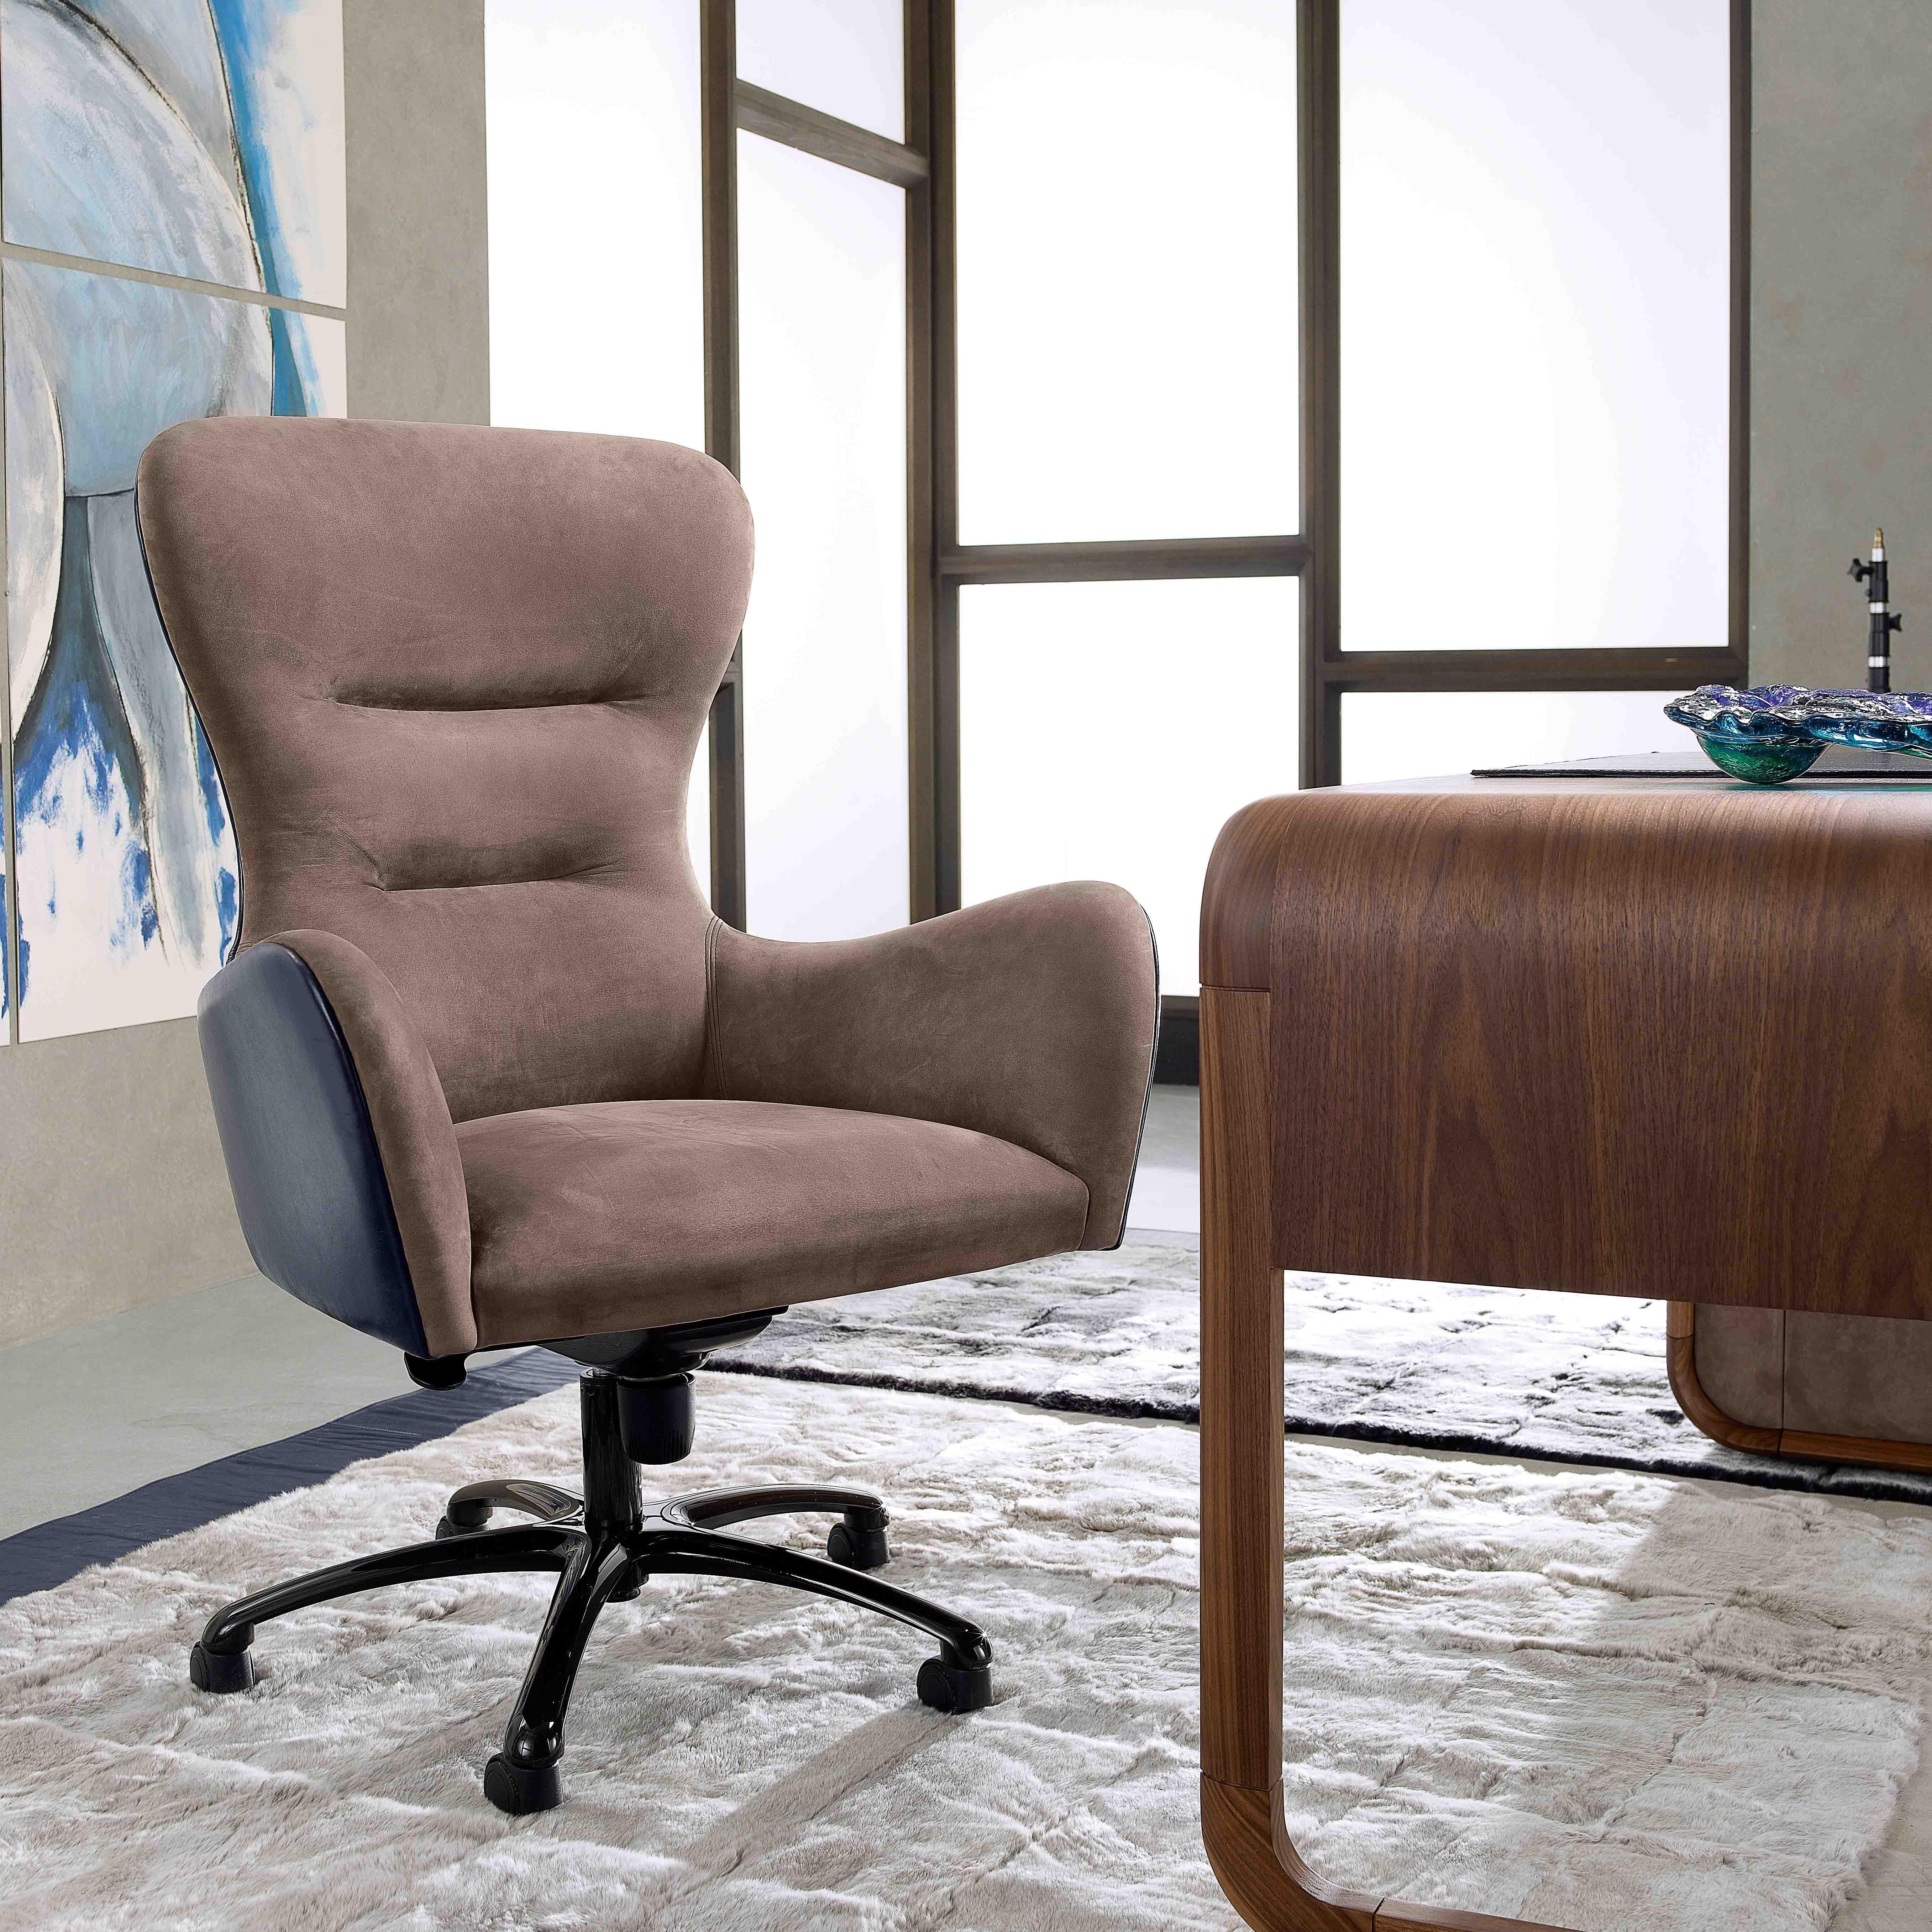 The elegant Gianpier office chair swivel combines a welcoming silhouette, superb upholstery and a mid-century-inspired structure. This armchair will be a standout piece when displayed in an office or any other contemporary space that needs special